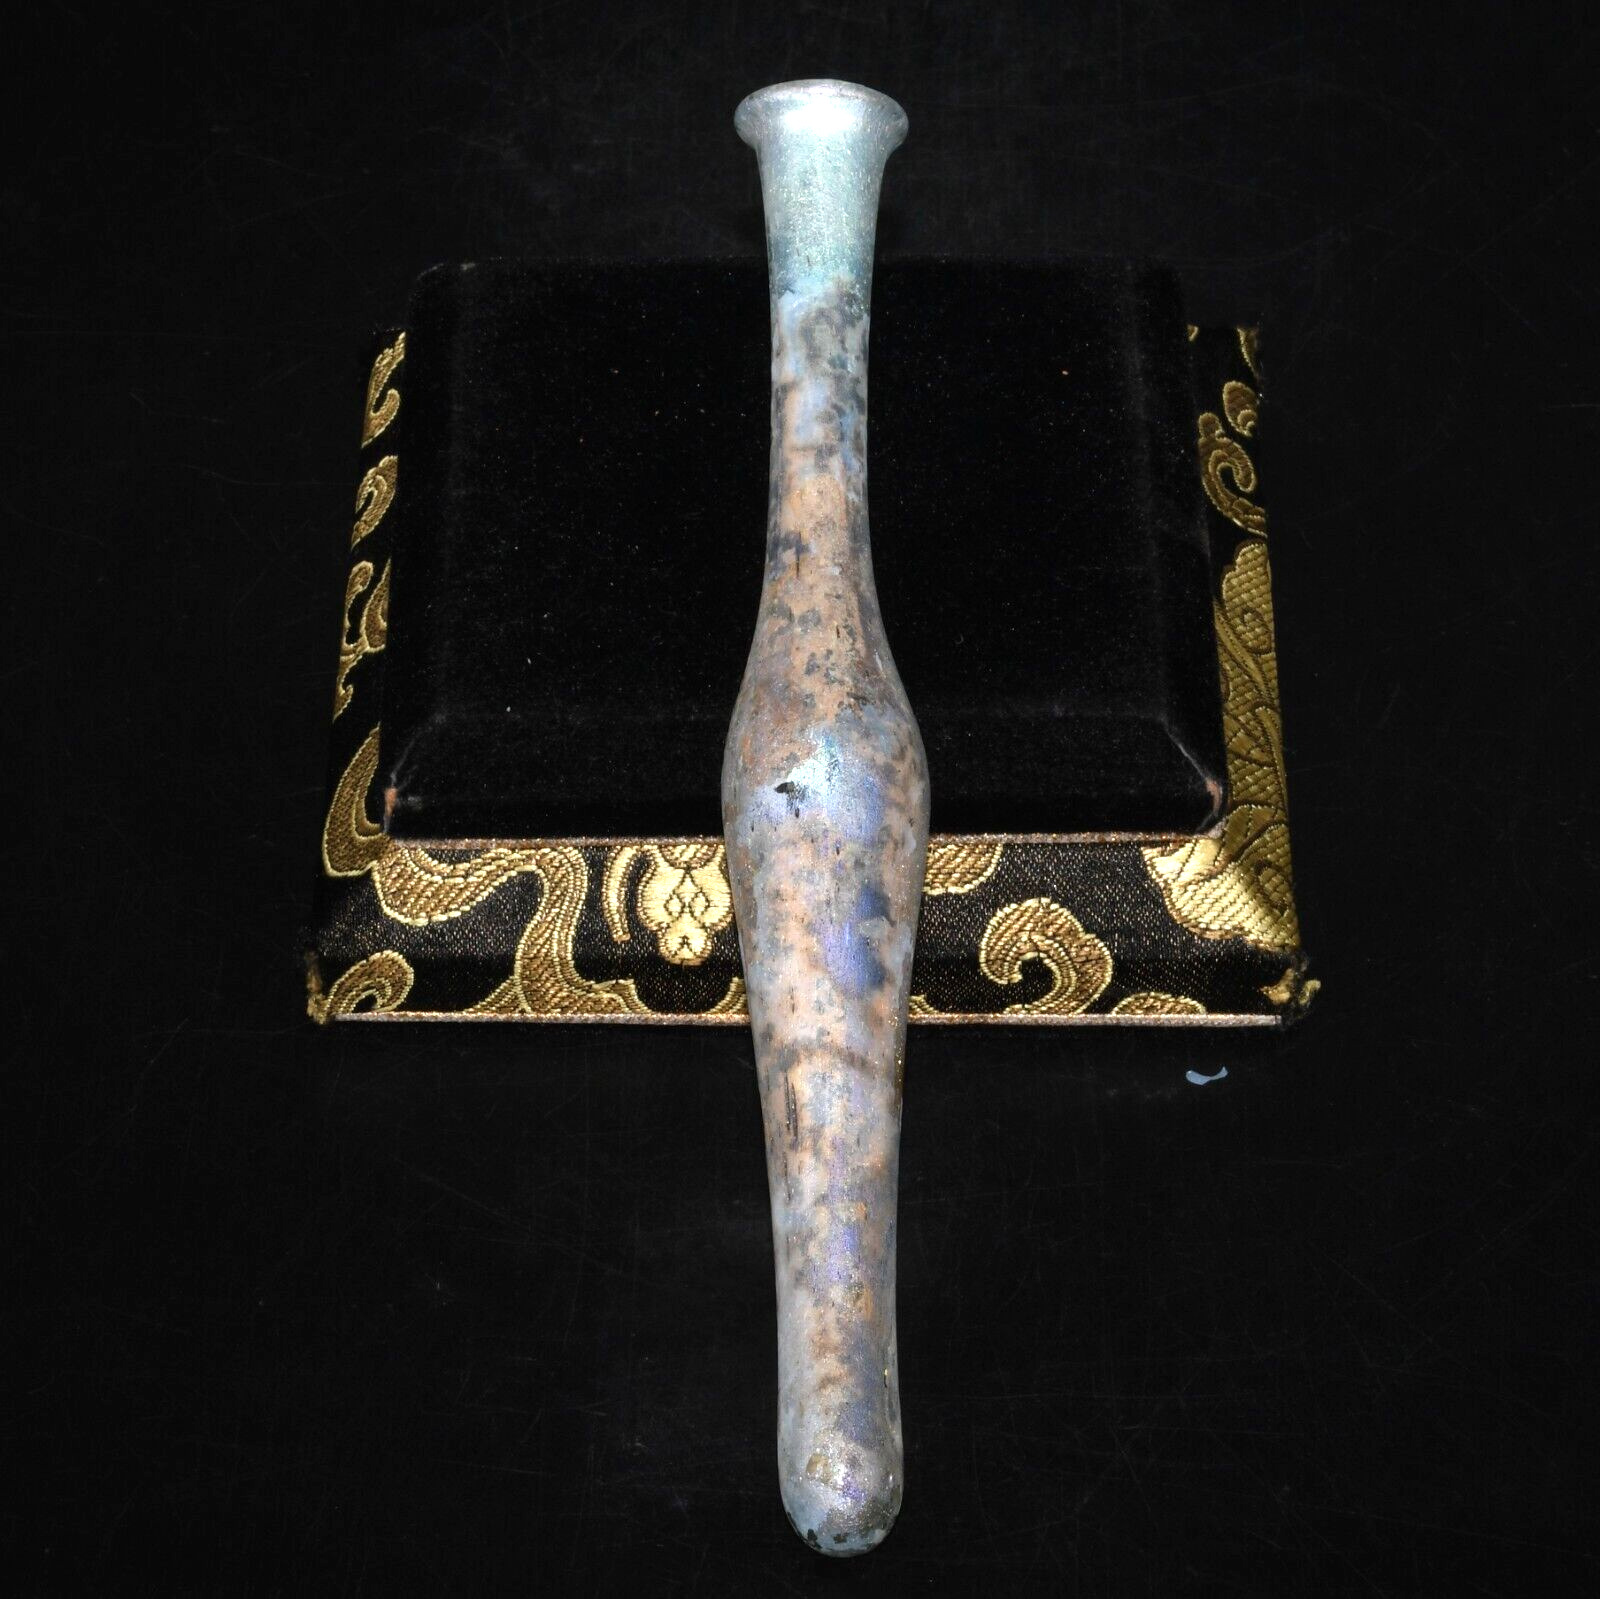 Ancient Roman Glass Intact Medical Vessel with Long Neck and Iridescent Patina